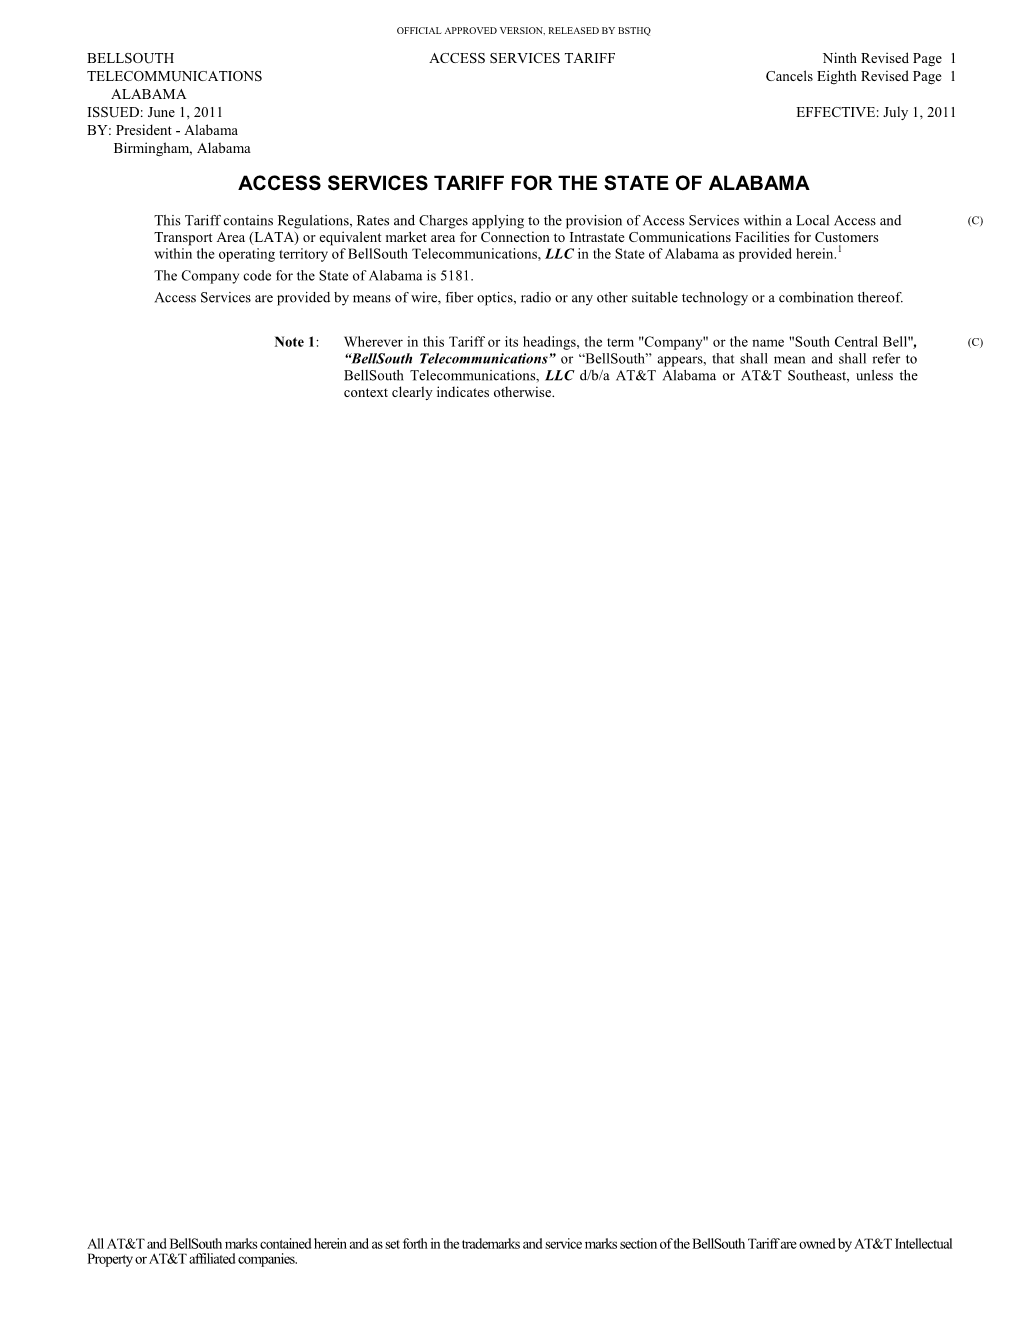 Access Services Tariff for the State of Alabama